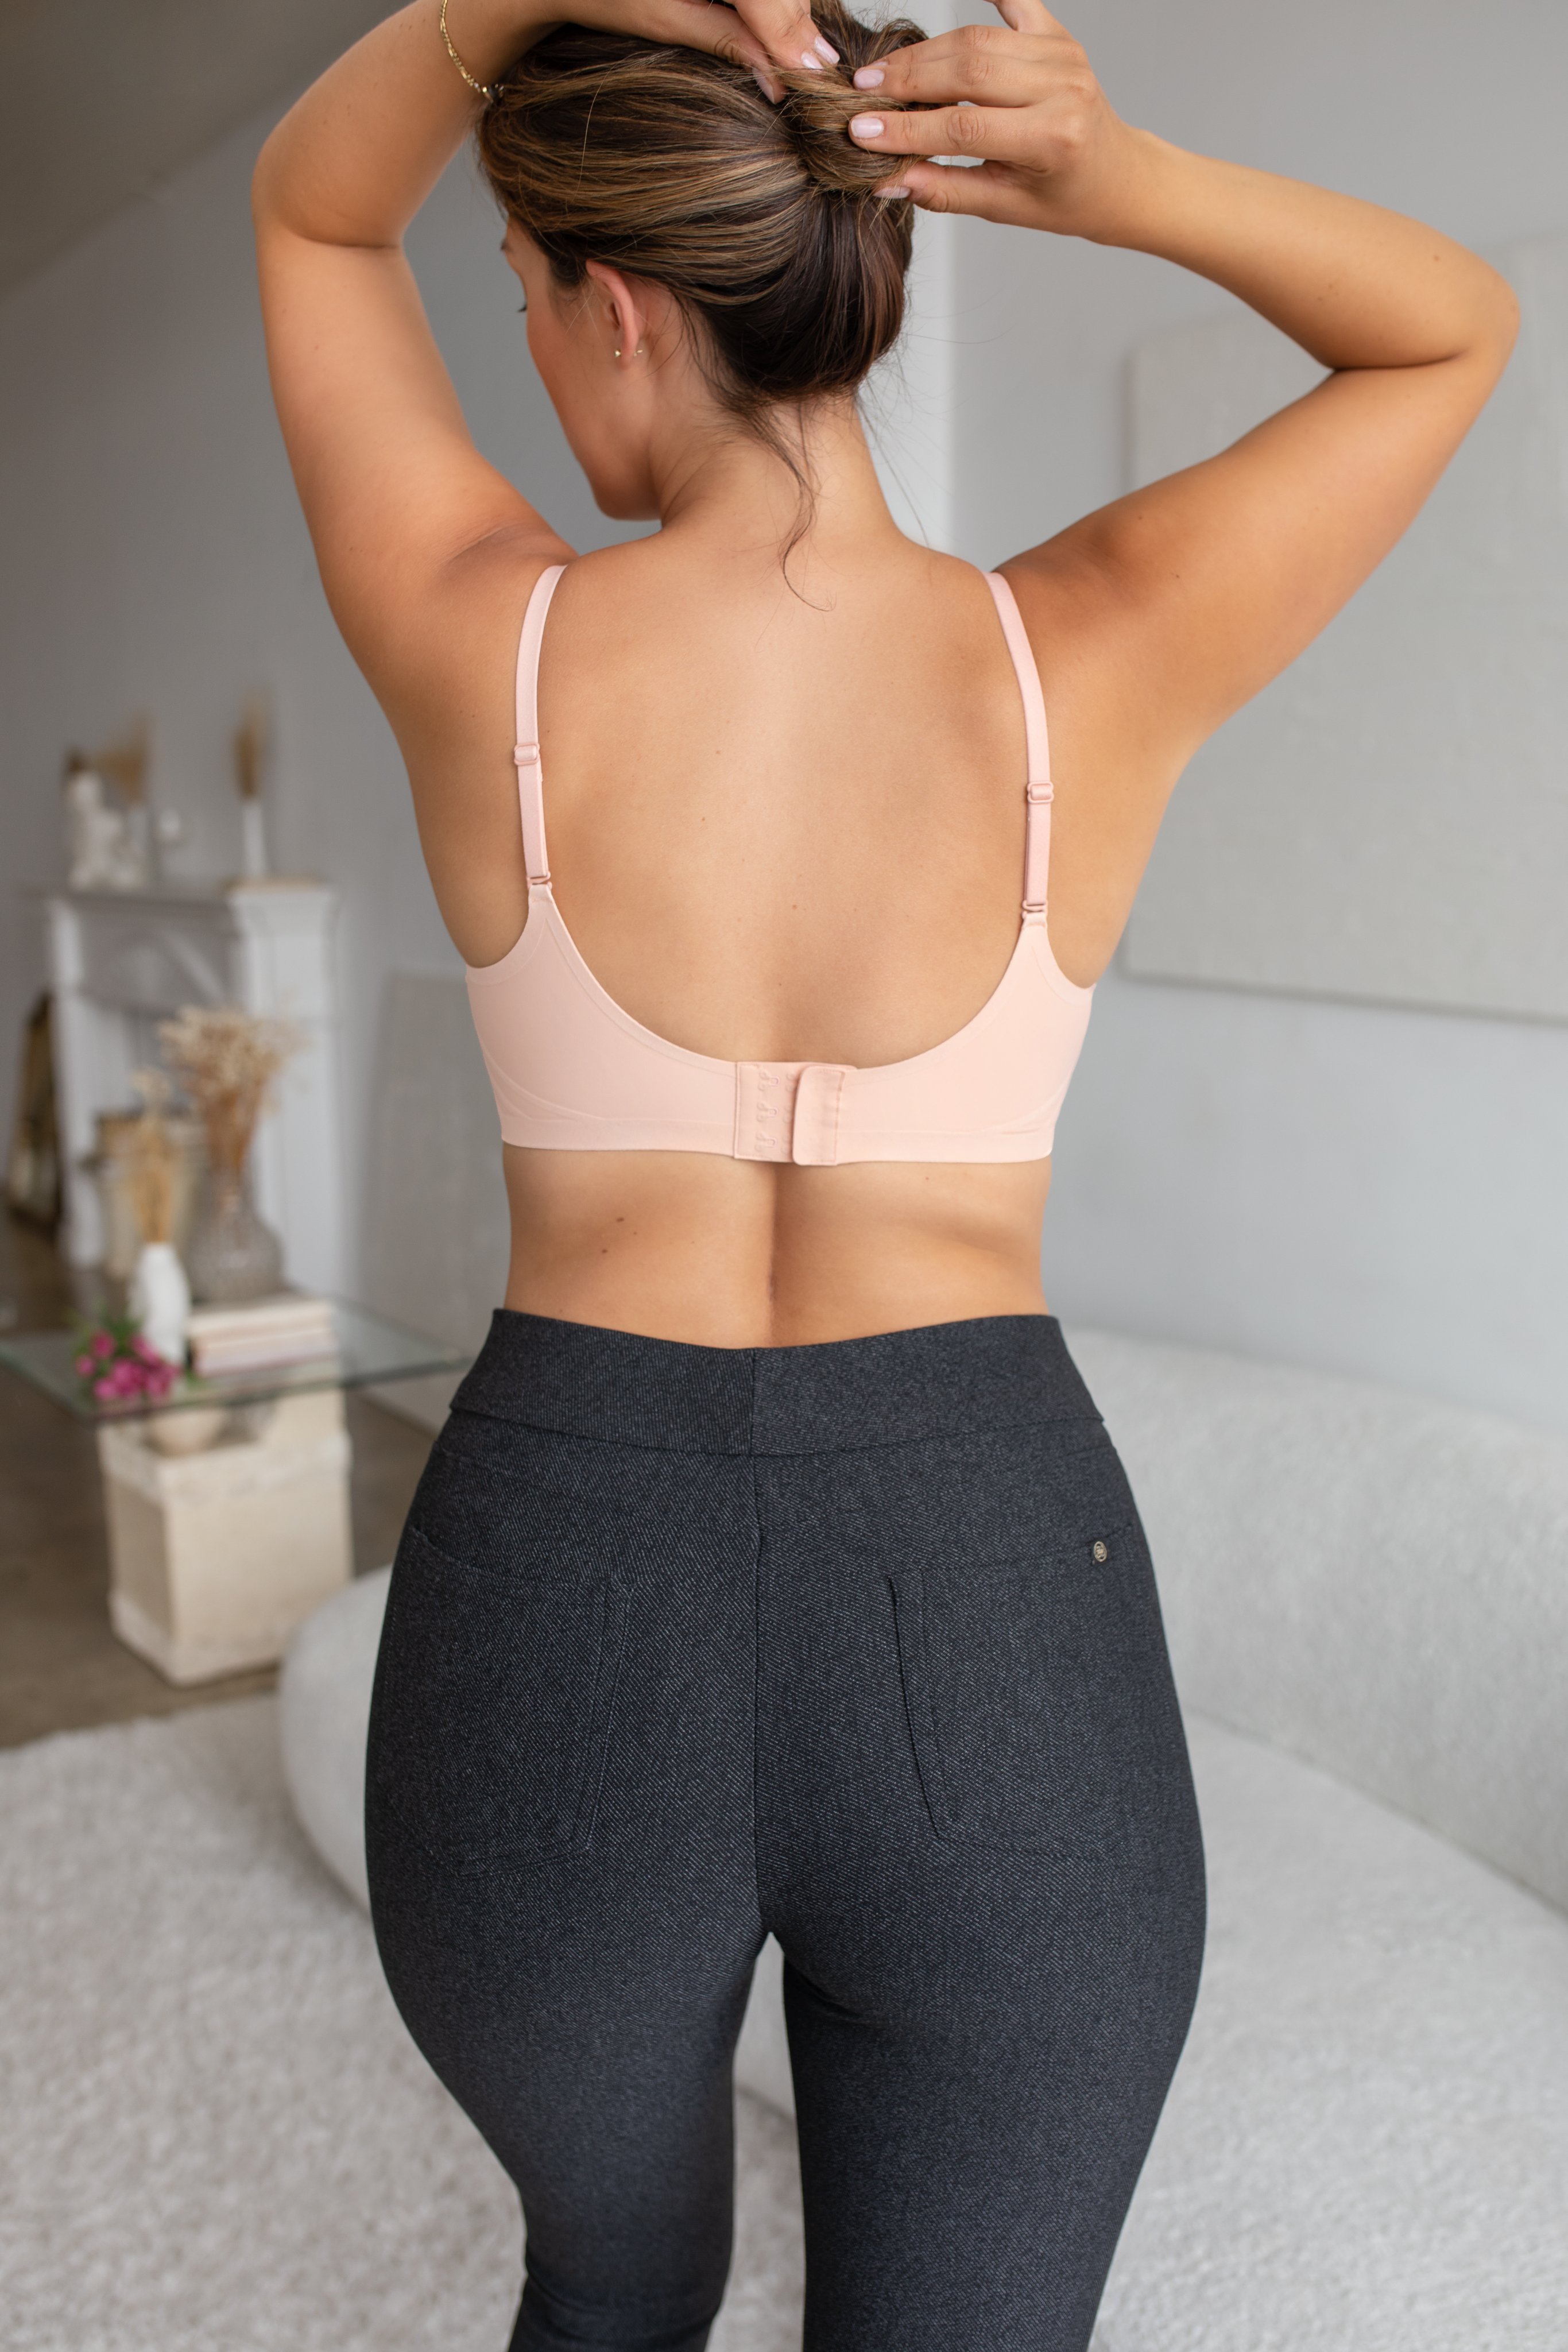 Honeylove on X: The EverReady Pant is finally back in stock in